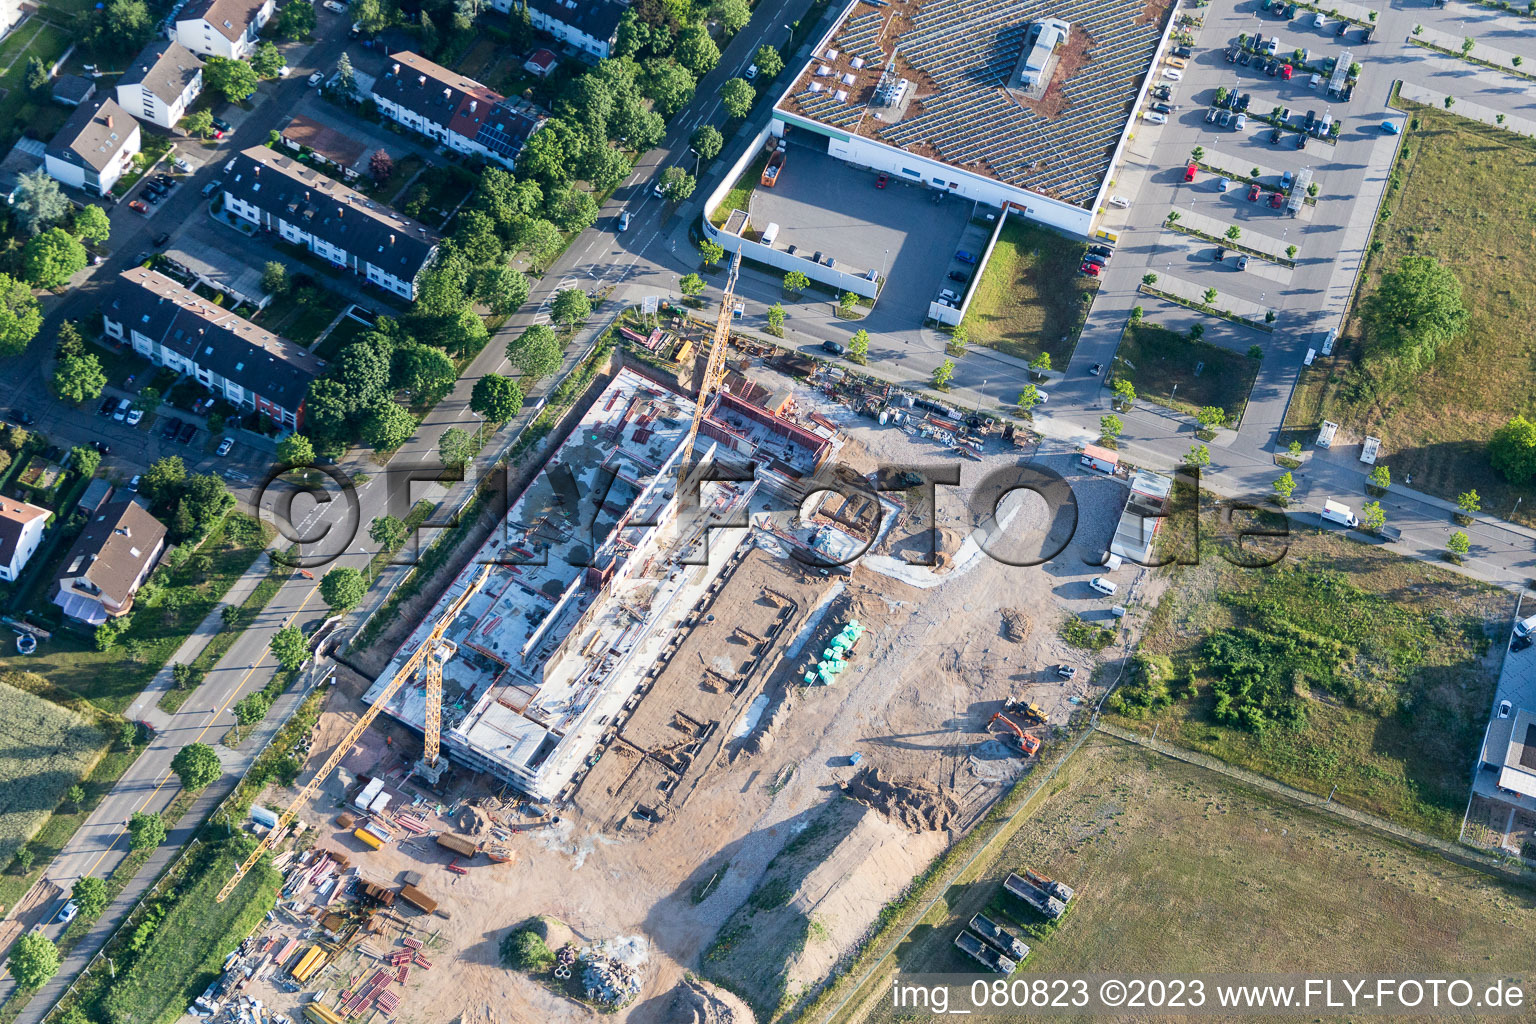 Aerial view of New development area in the district Knielingen in Karlsruhe in the state Baden-Wuerttemberg, Germany